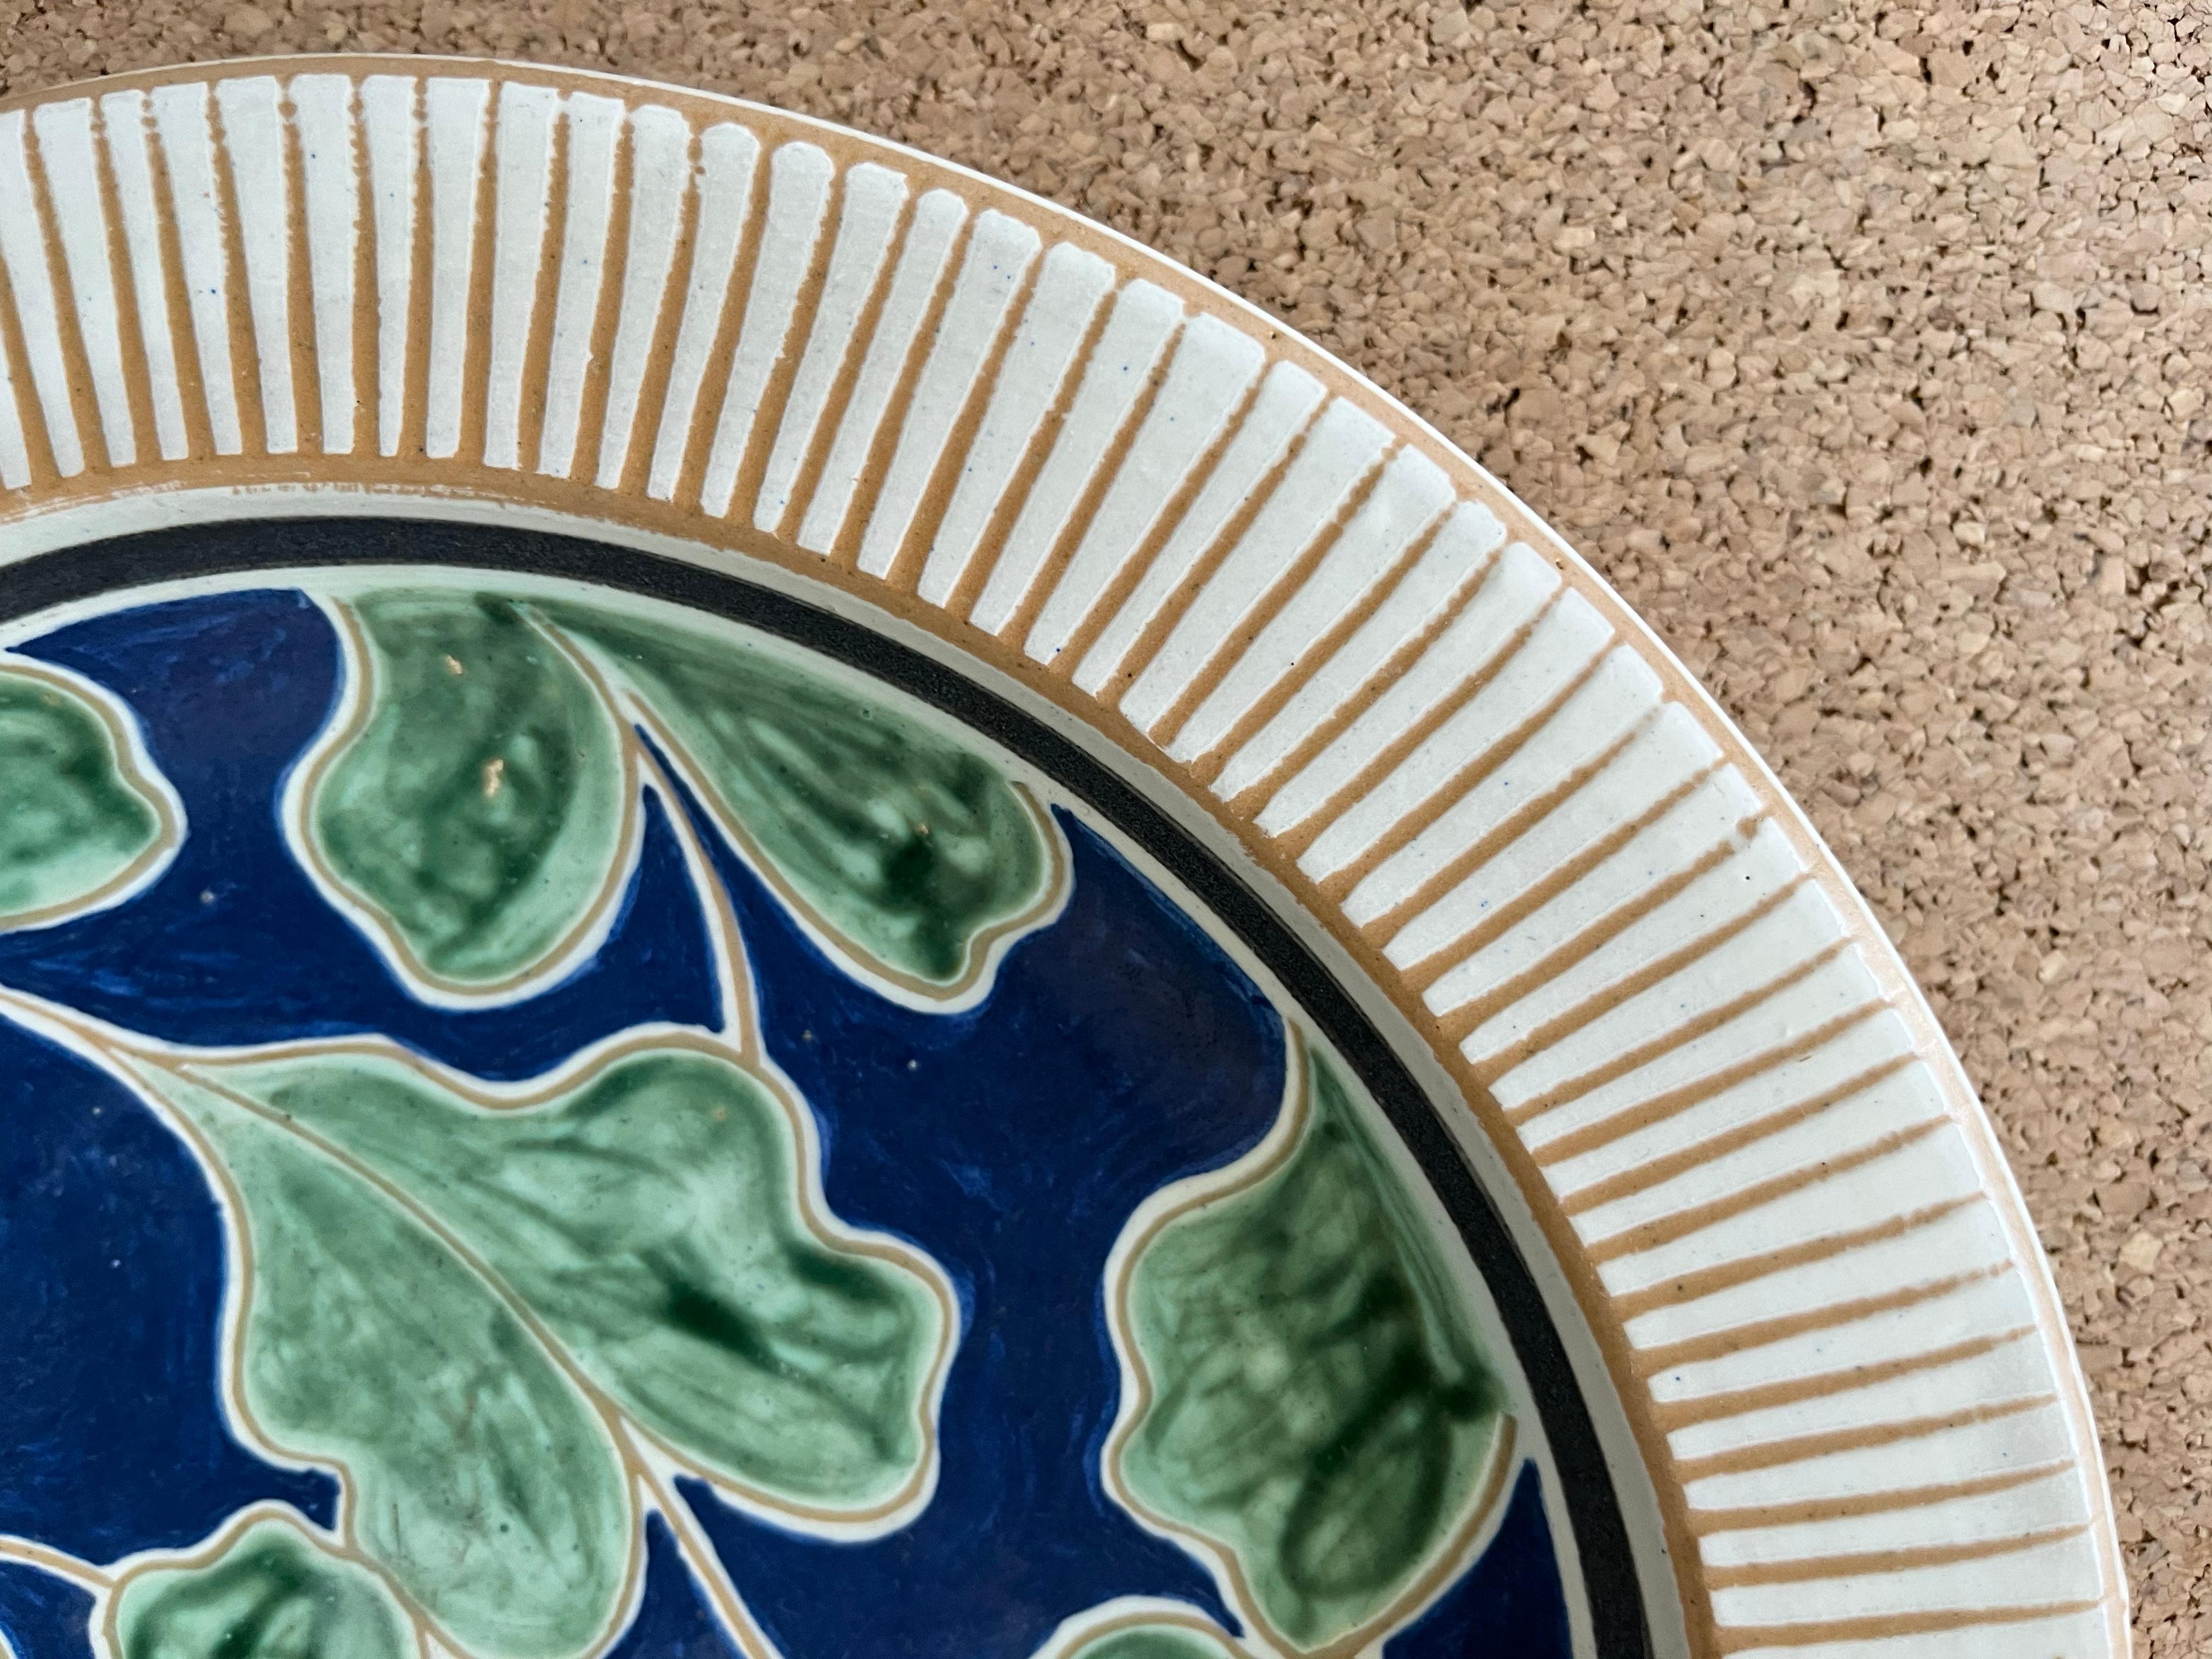 Danish midcentury handmade ceramic dish in cream, green and blue glazing In Good Condition For Sale In Frederiksberg C, DK